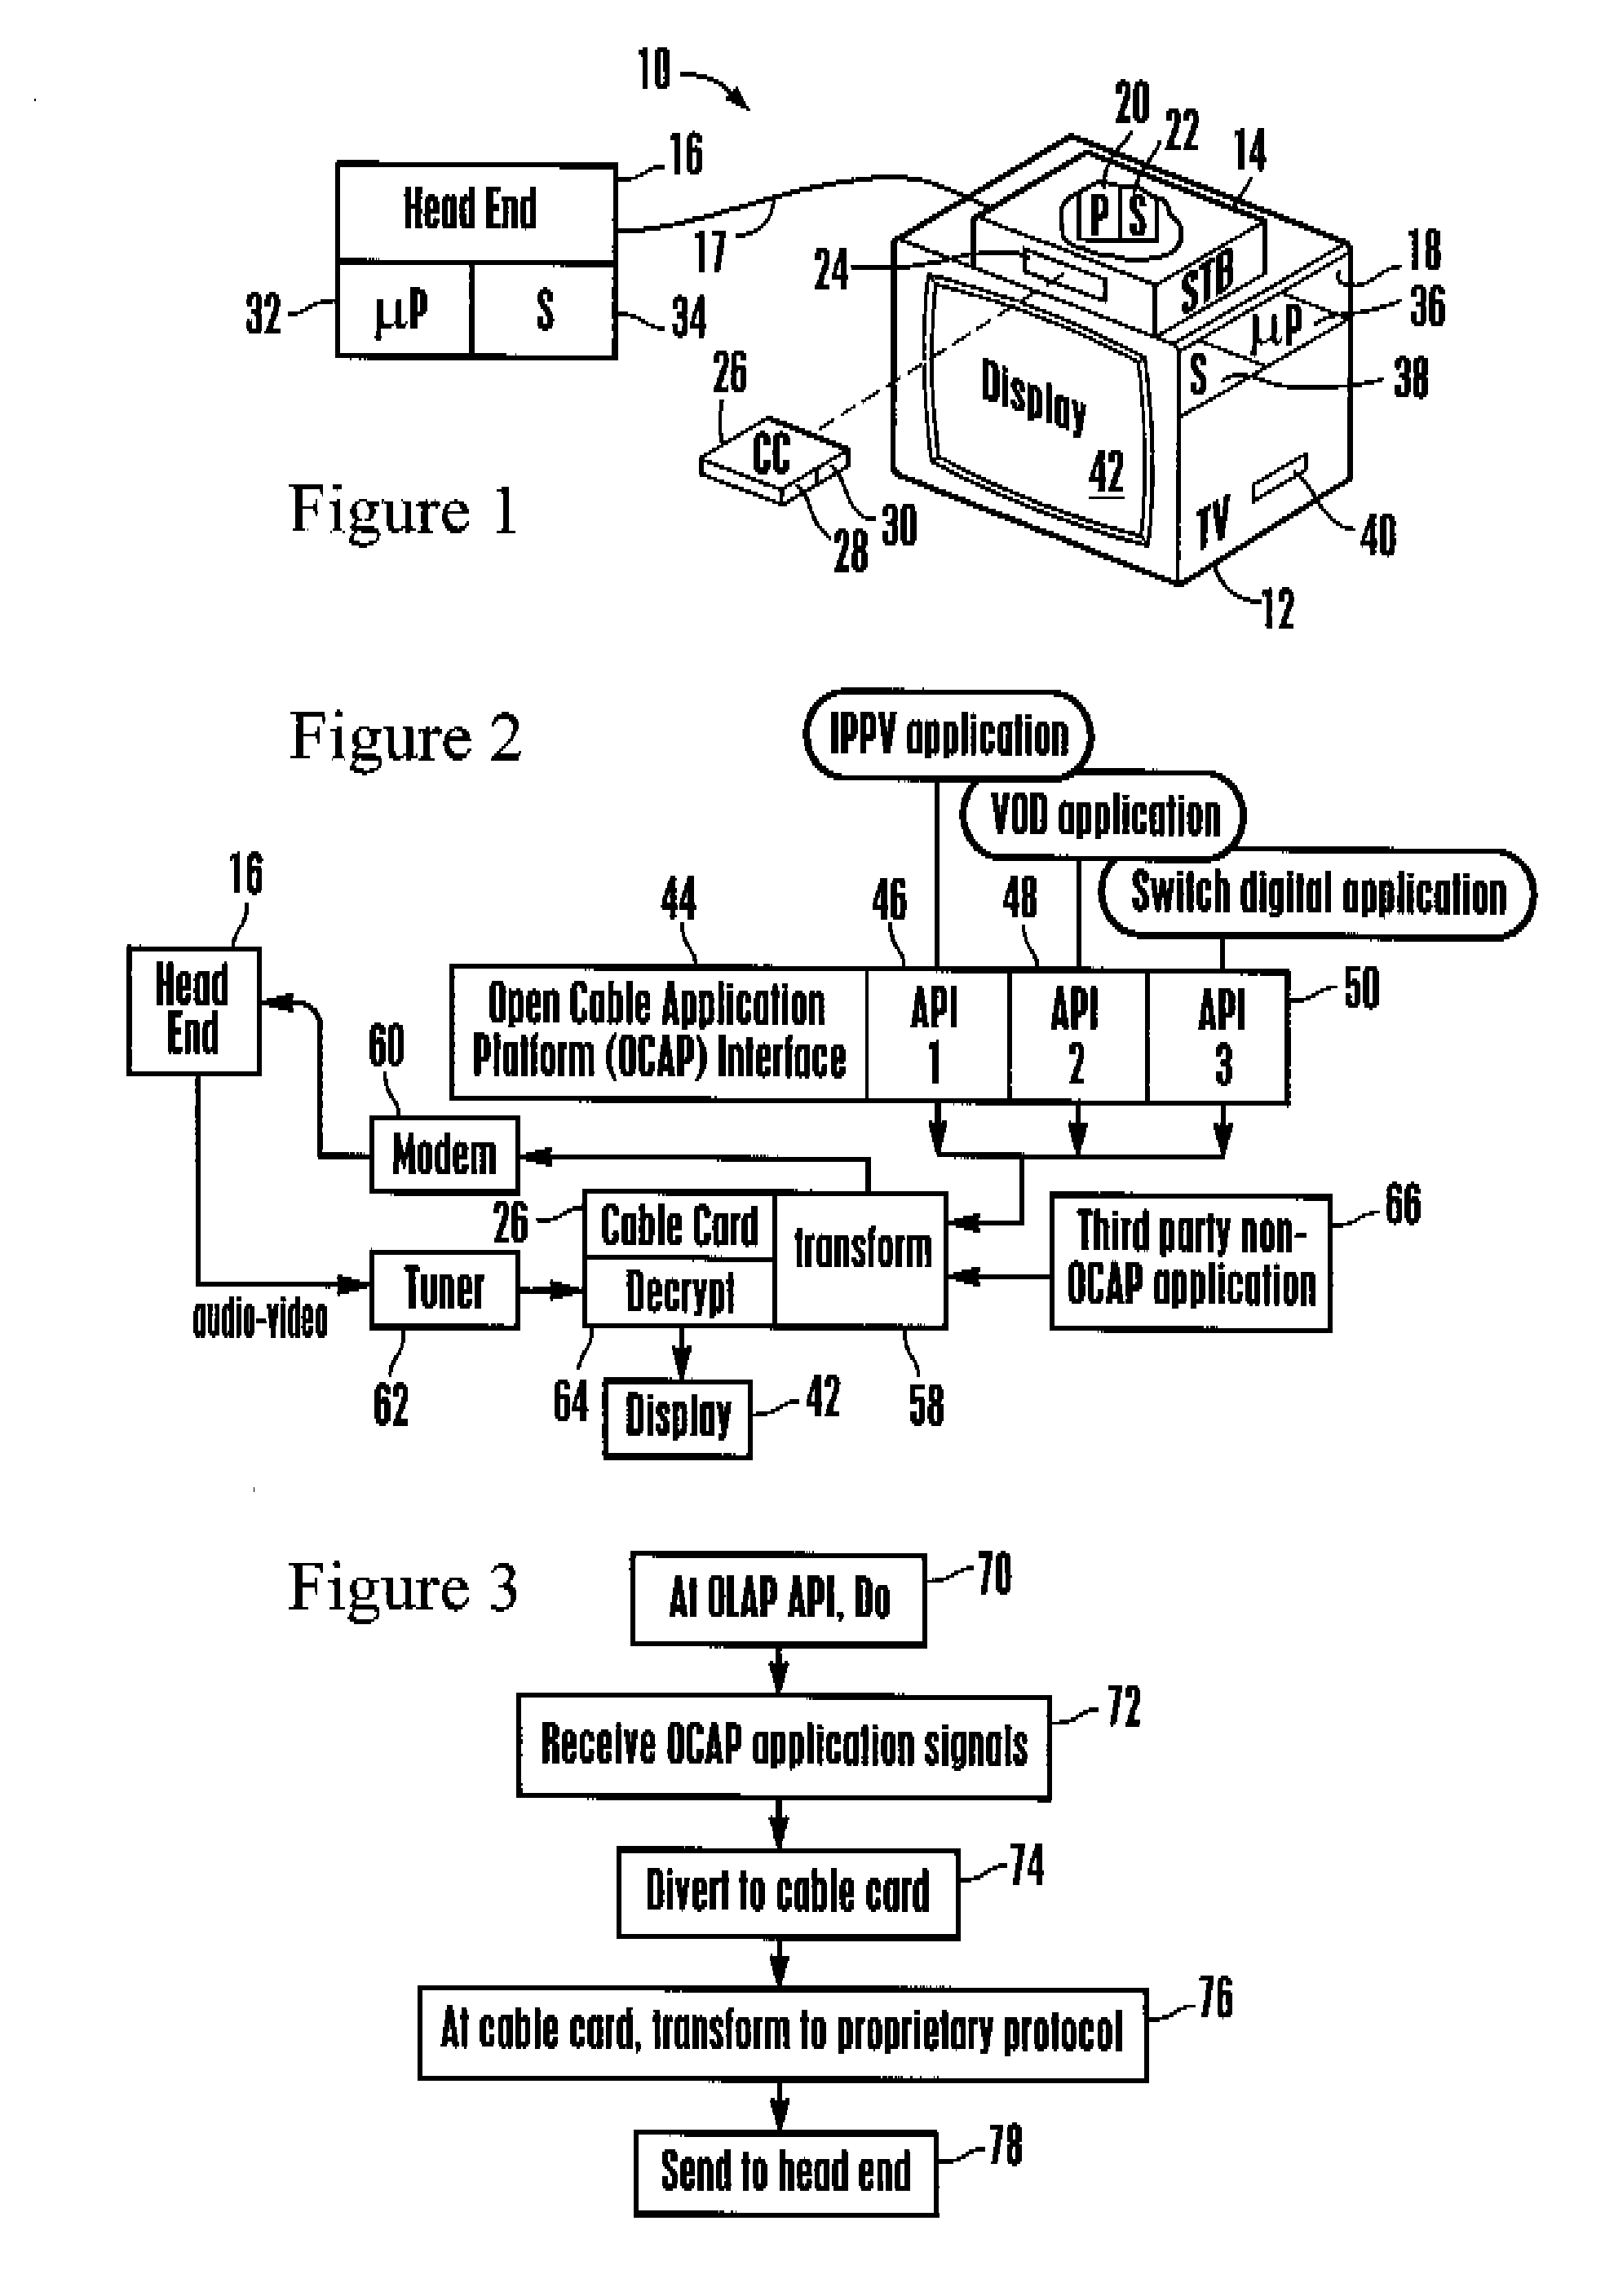 TV receiver using cable card for abstracting open cable application platform (OCAP) messages to and from the head end